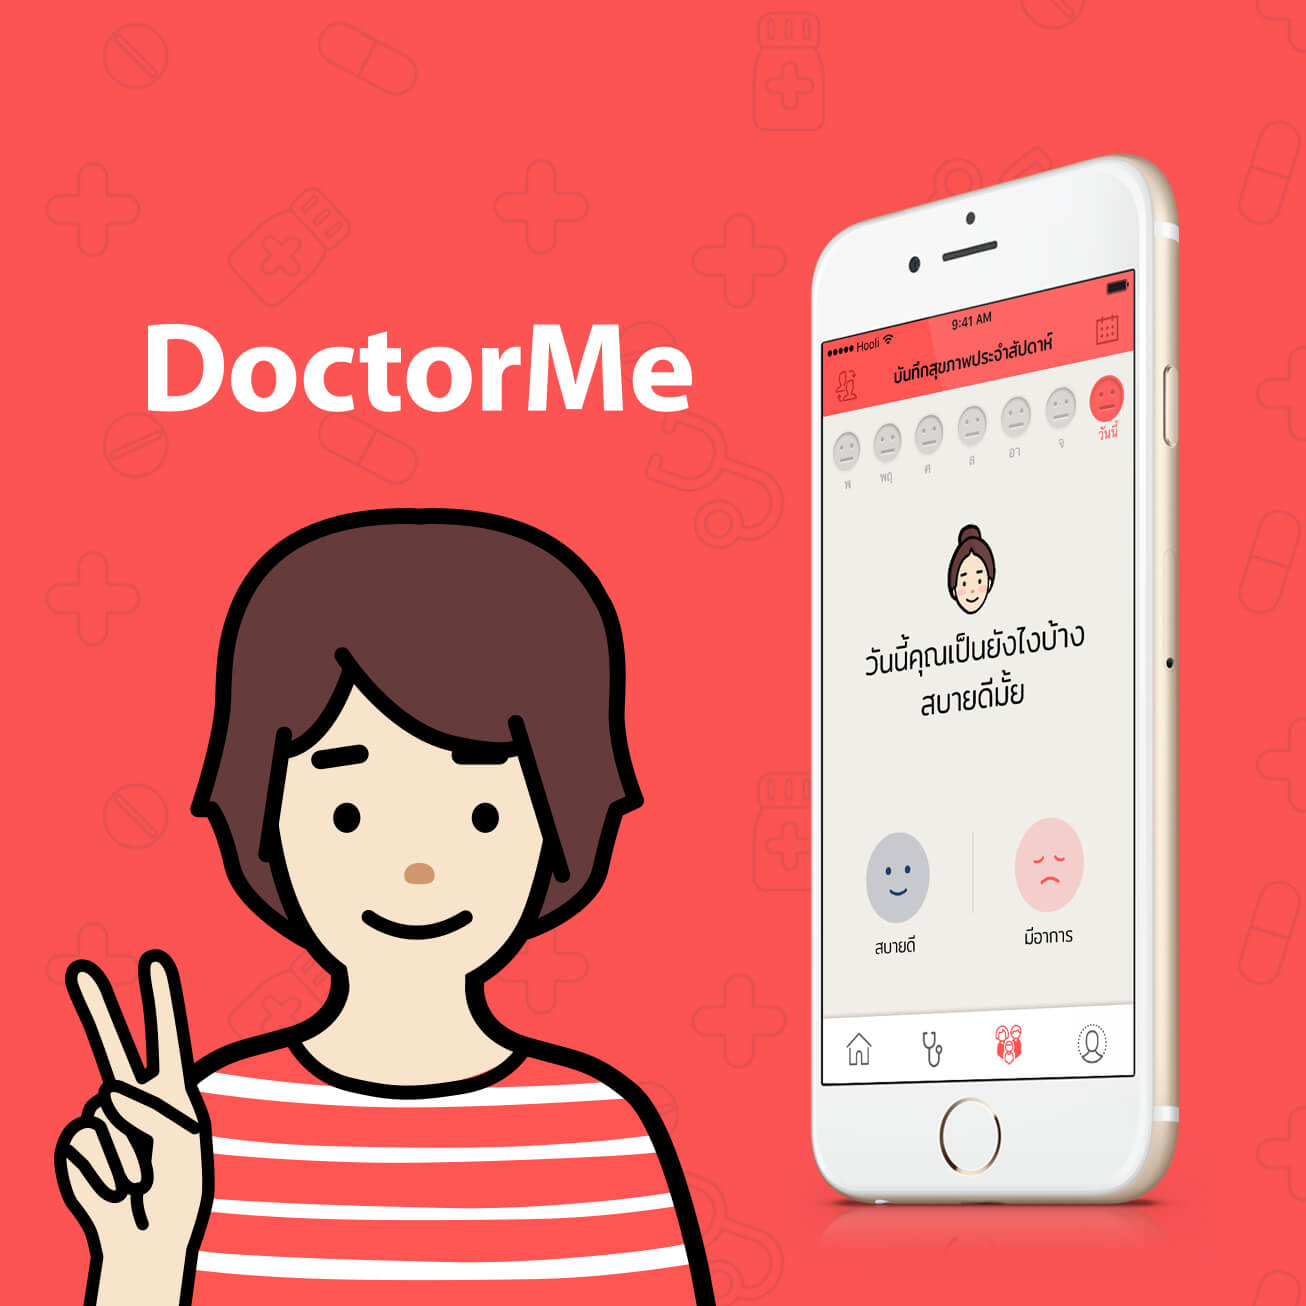 DoctorMe